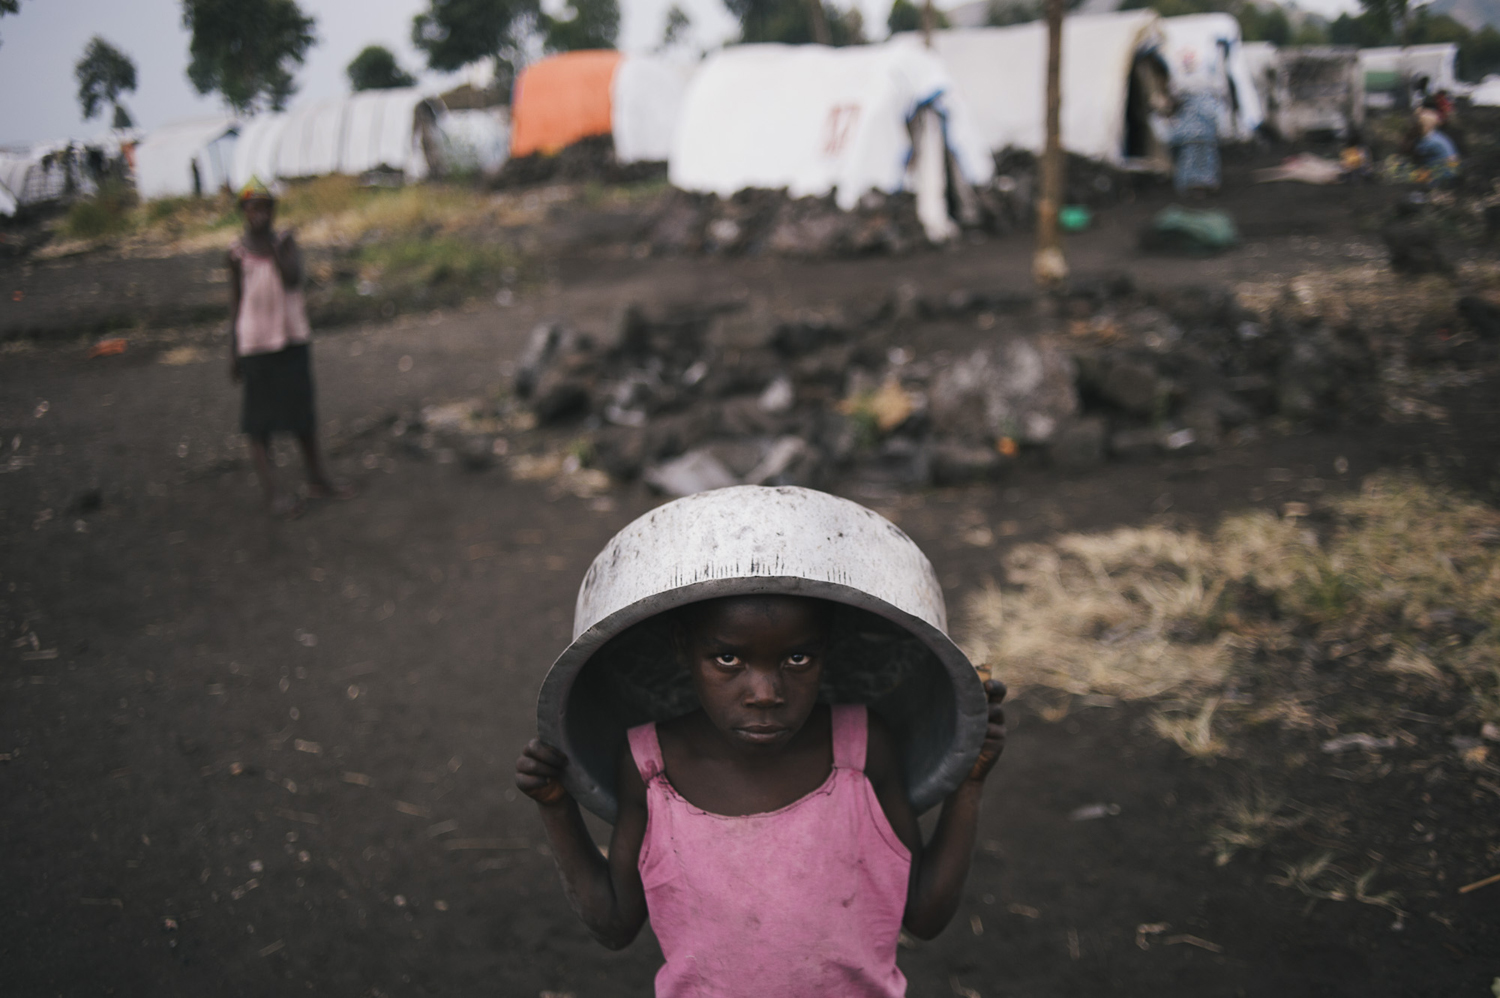 A displaced Congolese child stands with a basin on her head in the Bulengo site for internally displaced persons, July 14, 2014.